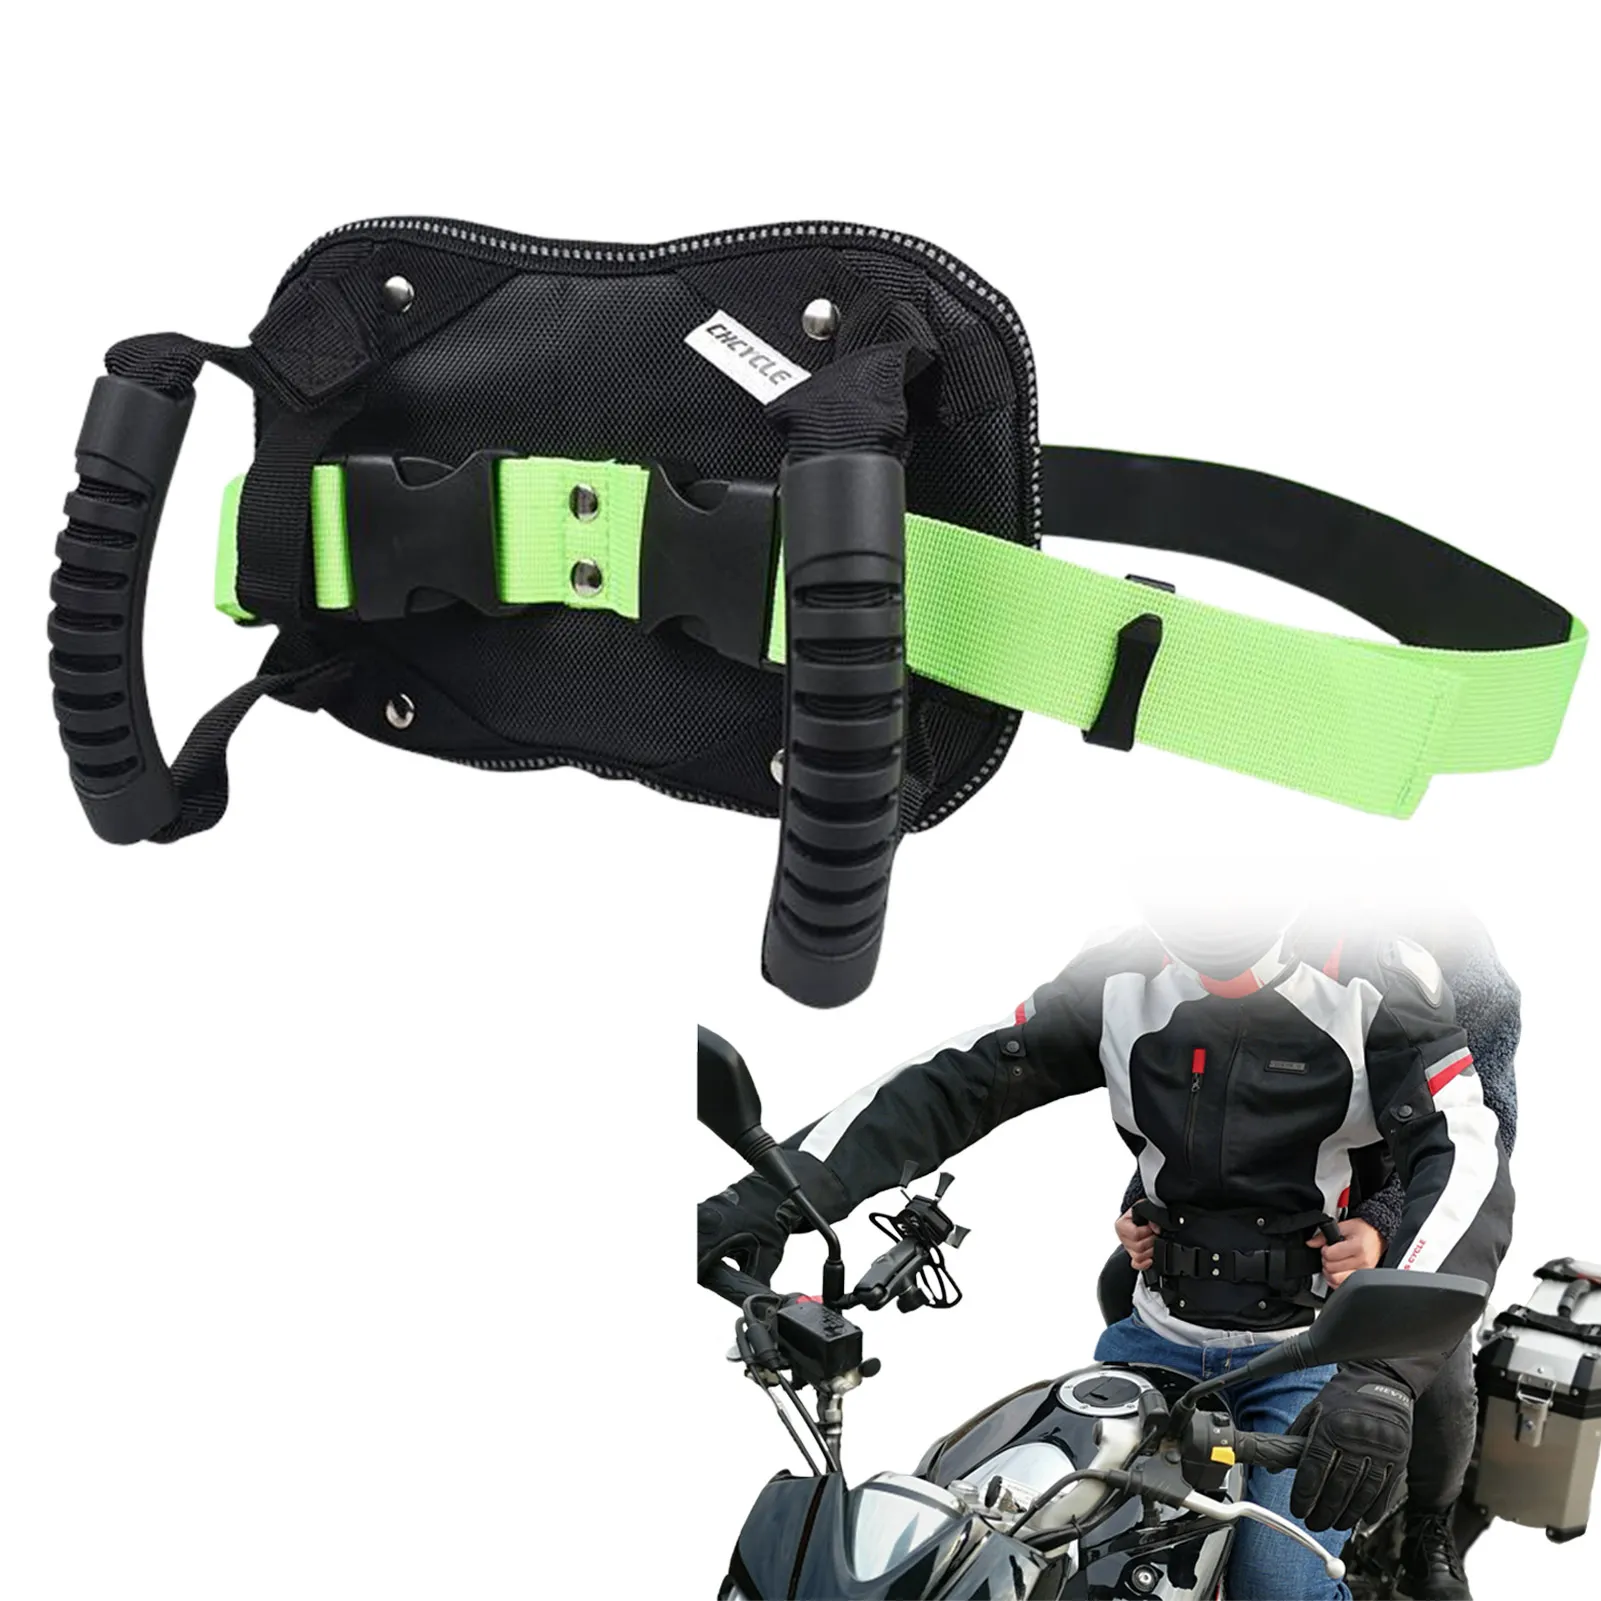 

Motorcycle Passenger Safety Belt Sturdy Motorcycle Grab Handles Beach Snowmobile Handrail Motorcycle Harness For Kids With